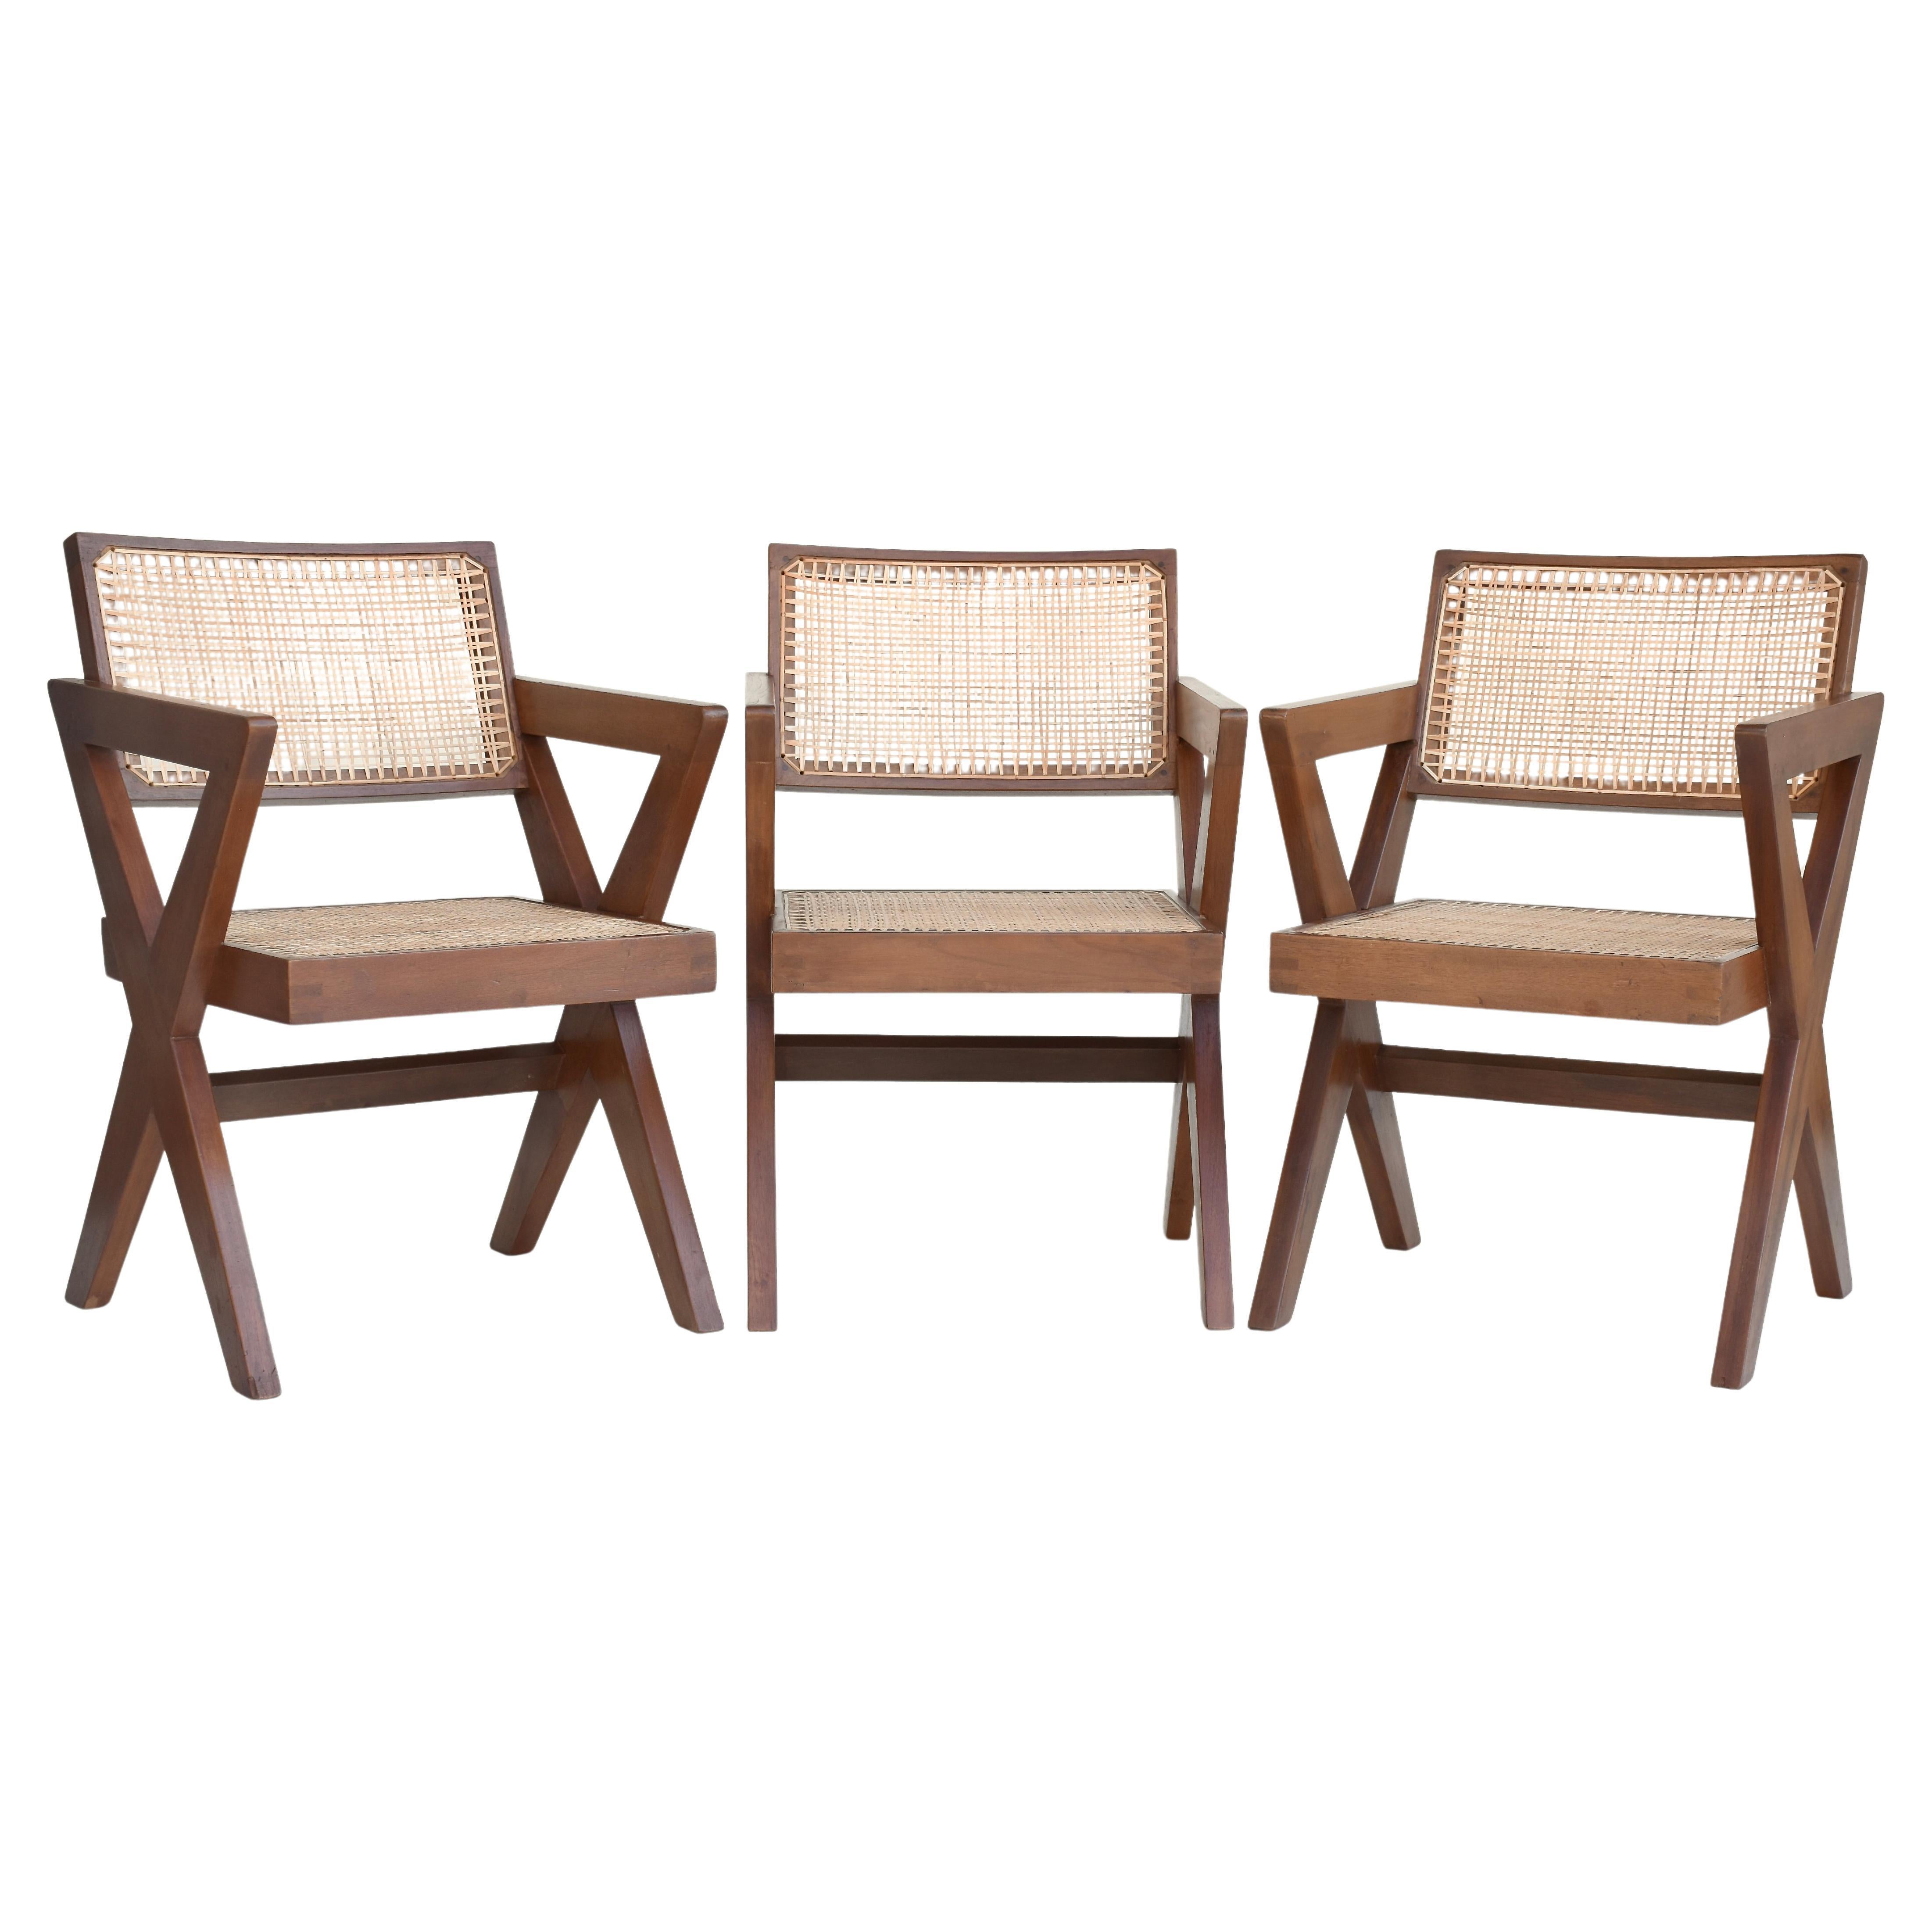 Pierre Jeanneret Set of 8 X-Leg Office Chairs Circa 1960s, Chandigarh In Good Condition For Sale In Bonita Springs, FL